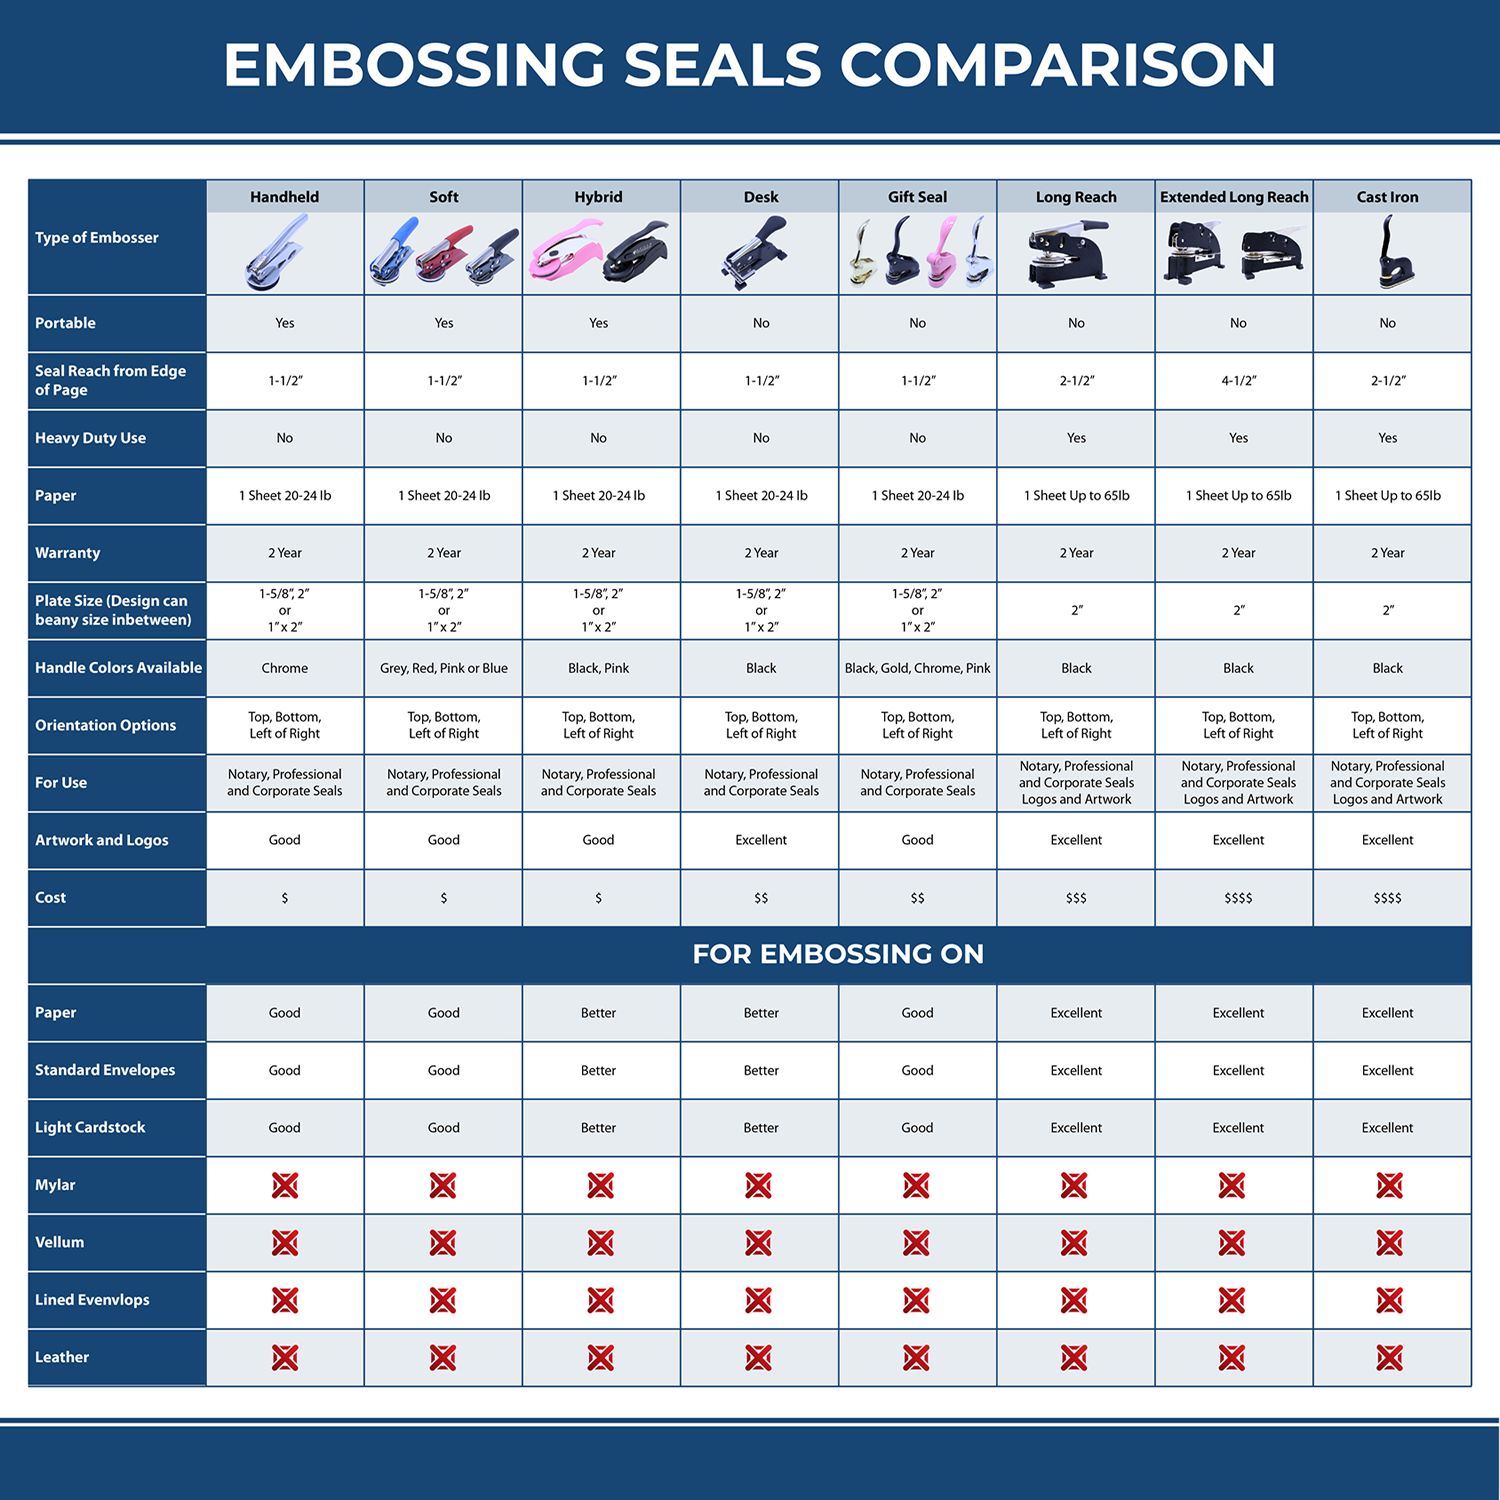 A comparison chart for the different types of mount models available for the Soft Puerto Rico Professional Engineer Seal.